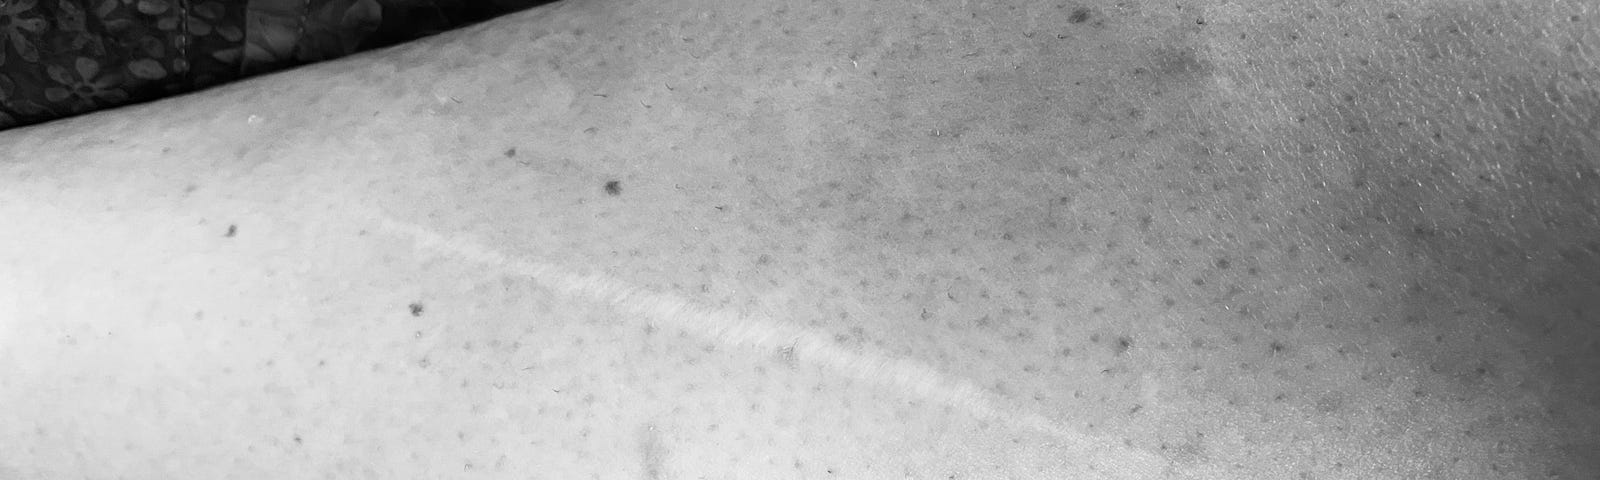 black and white photo of a pale, thin, straight line scar on a person’s calf.